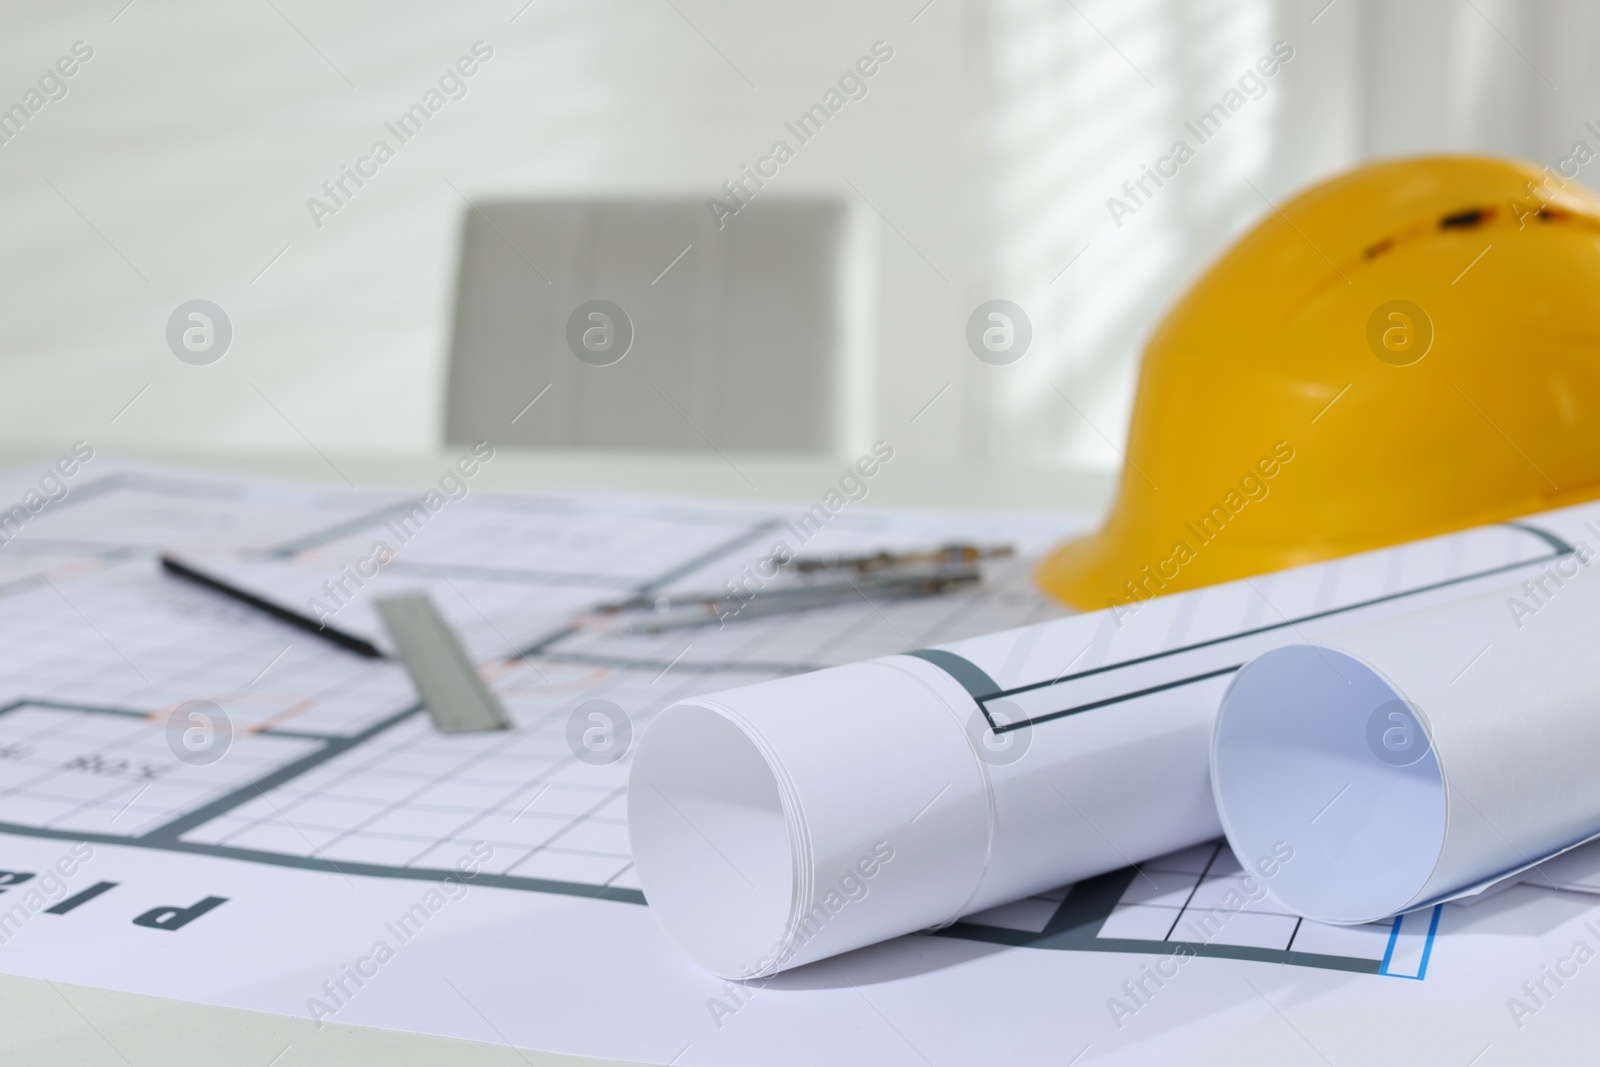 Photo of Construction drawings, safety hat and stationery on table in office